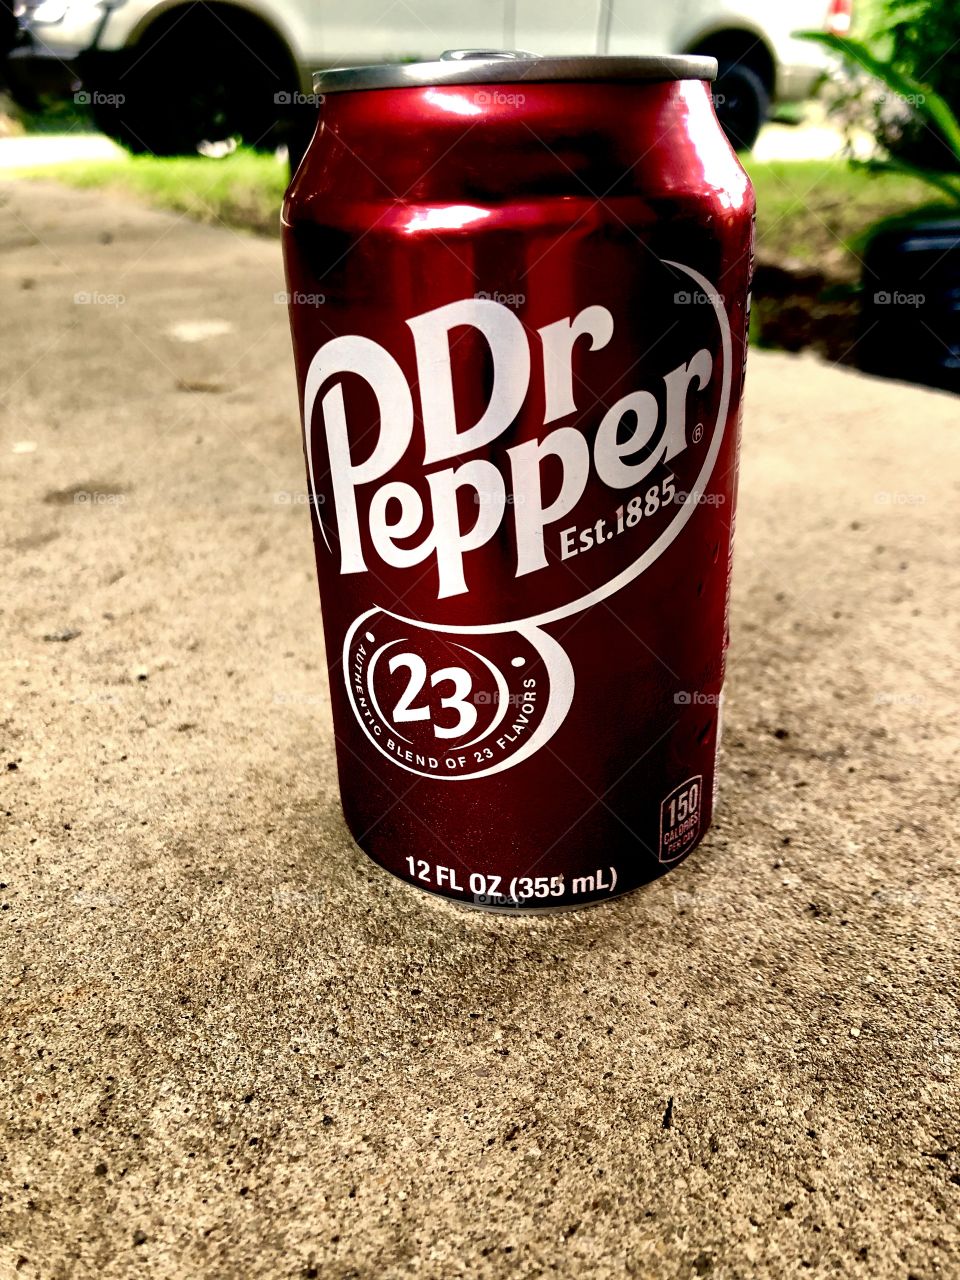 Nothing like a delicious, refreshing, Dr. Pepper on a hot day full of hard work. 